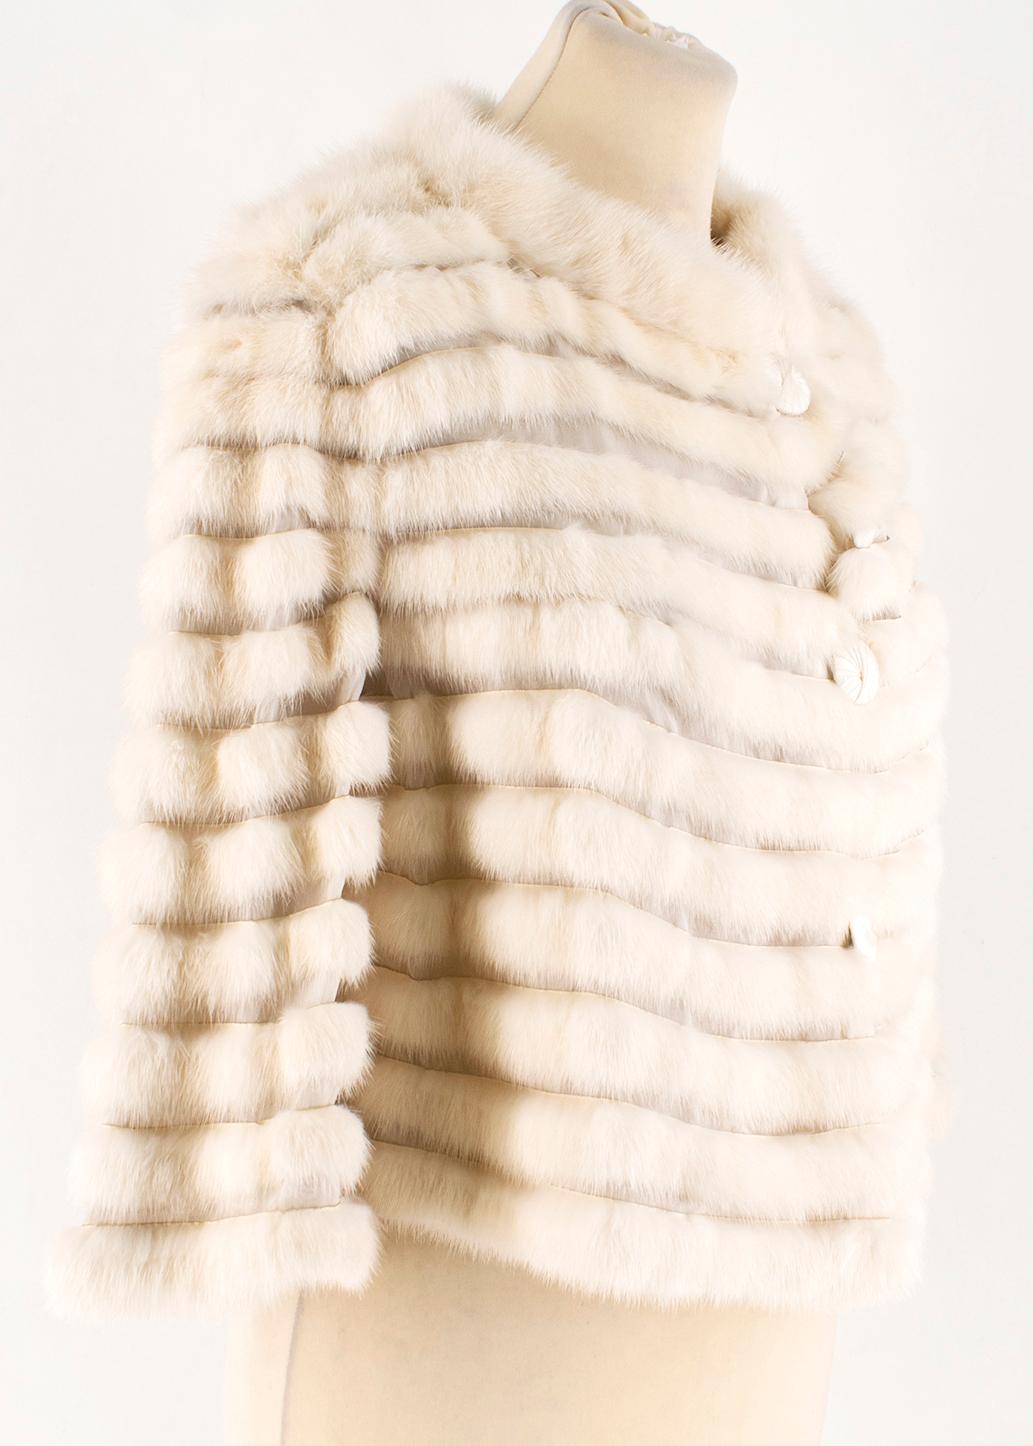 Short soft rabbit fur jacket from Fendi in a bone white colour. 

- Sheer panels
- Hologram label
- Front button fastening
- Mink fur 
- Made in Italy

Please note, these items are pre-owned and may show signs of being stored even when unworn and